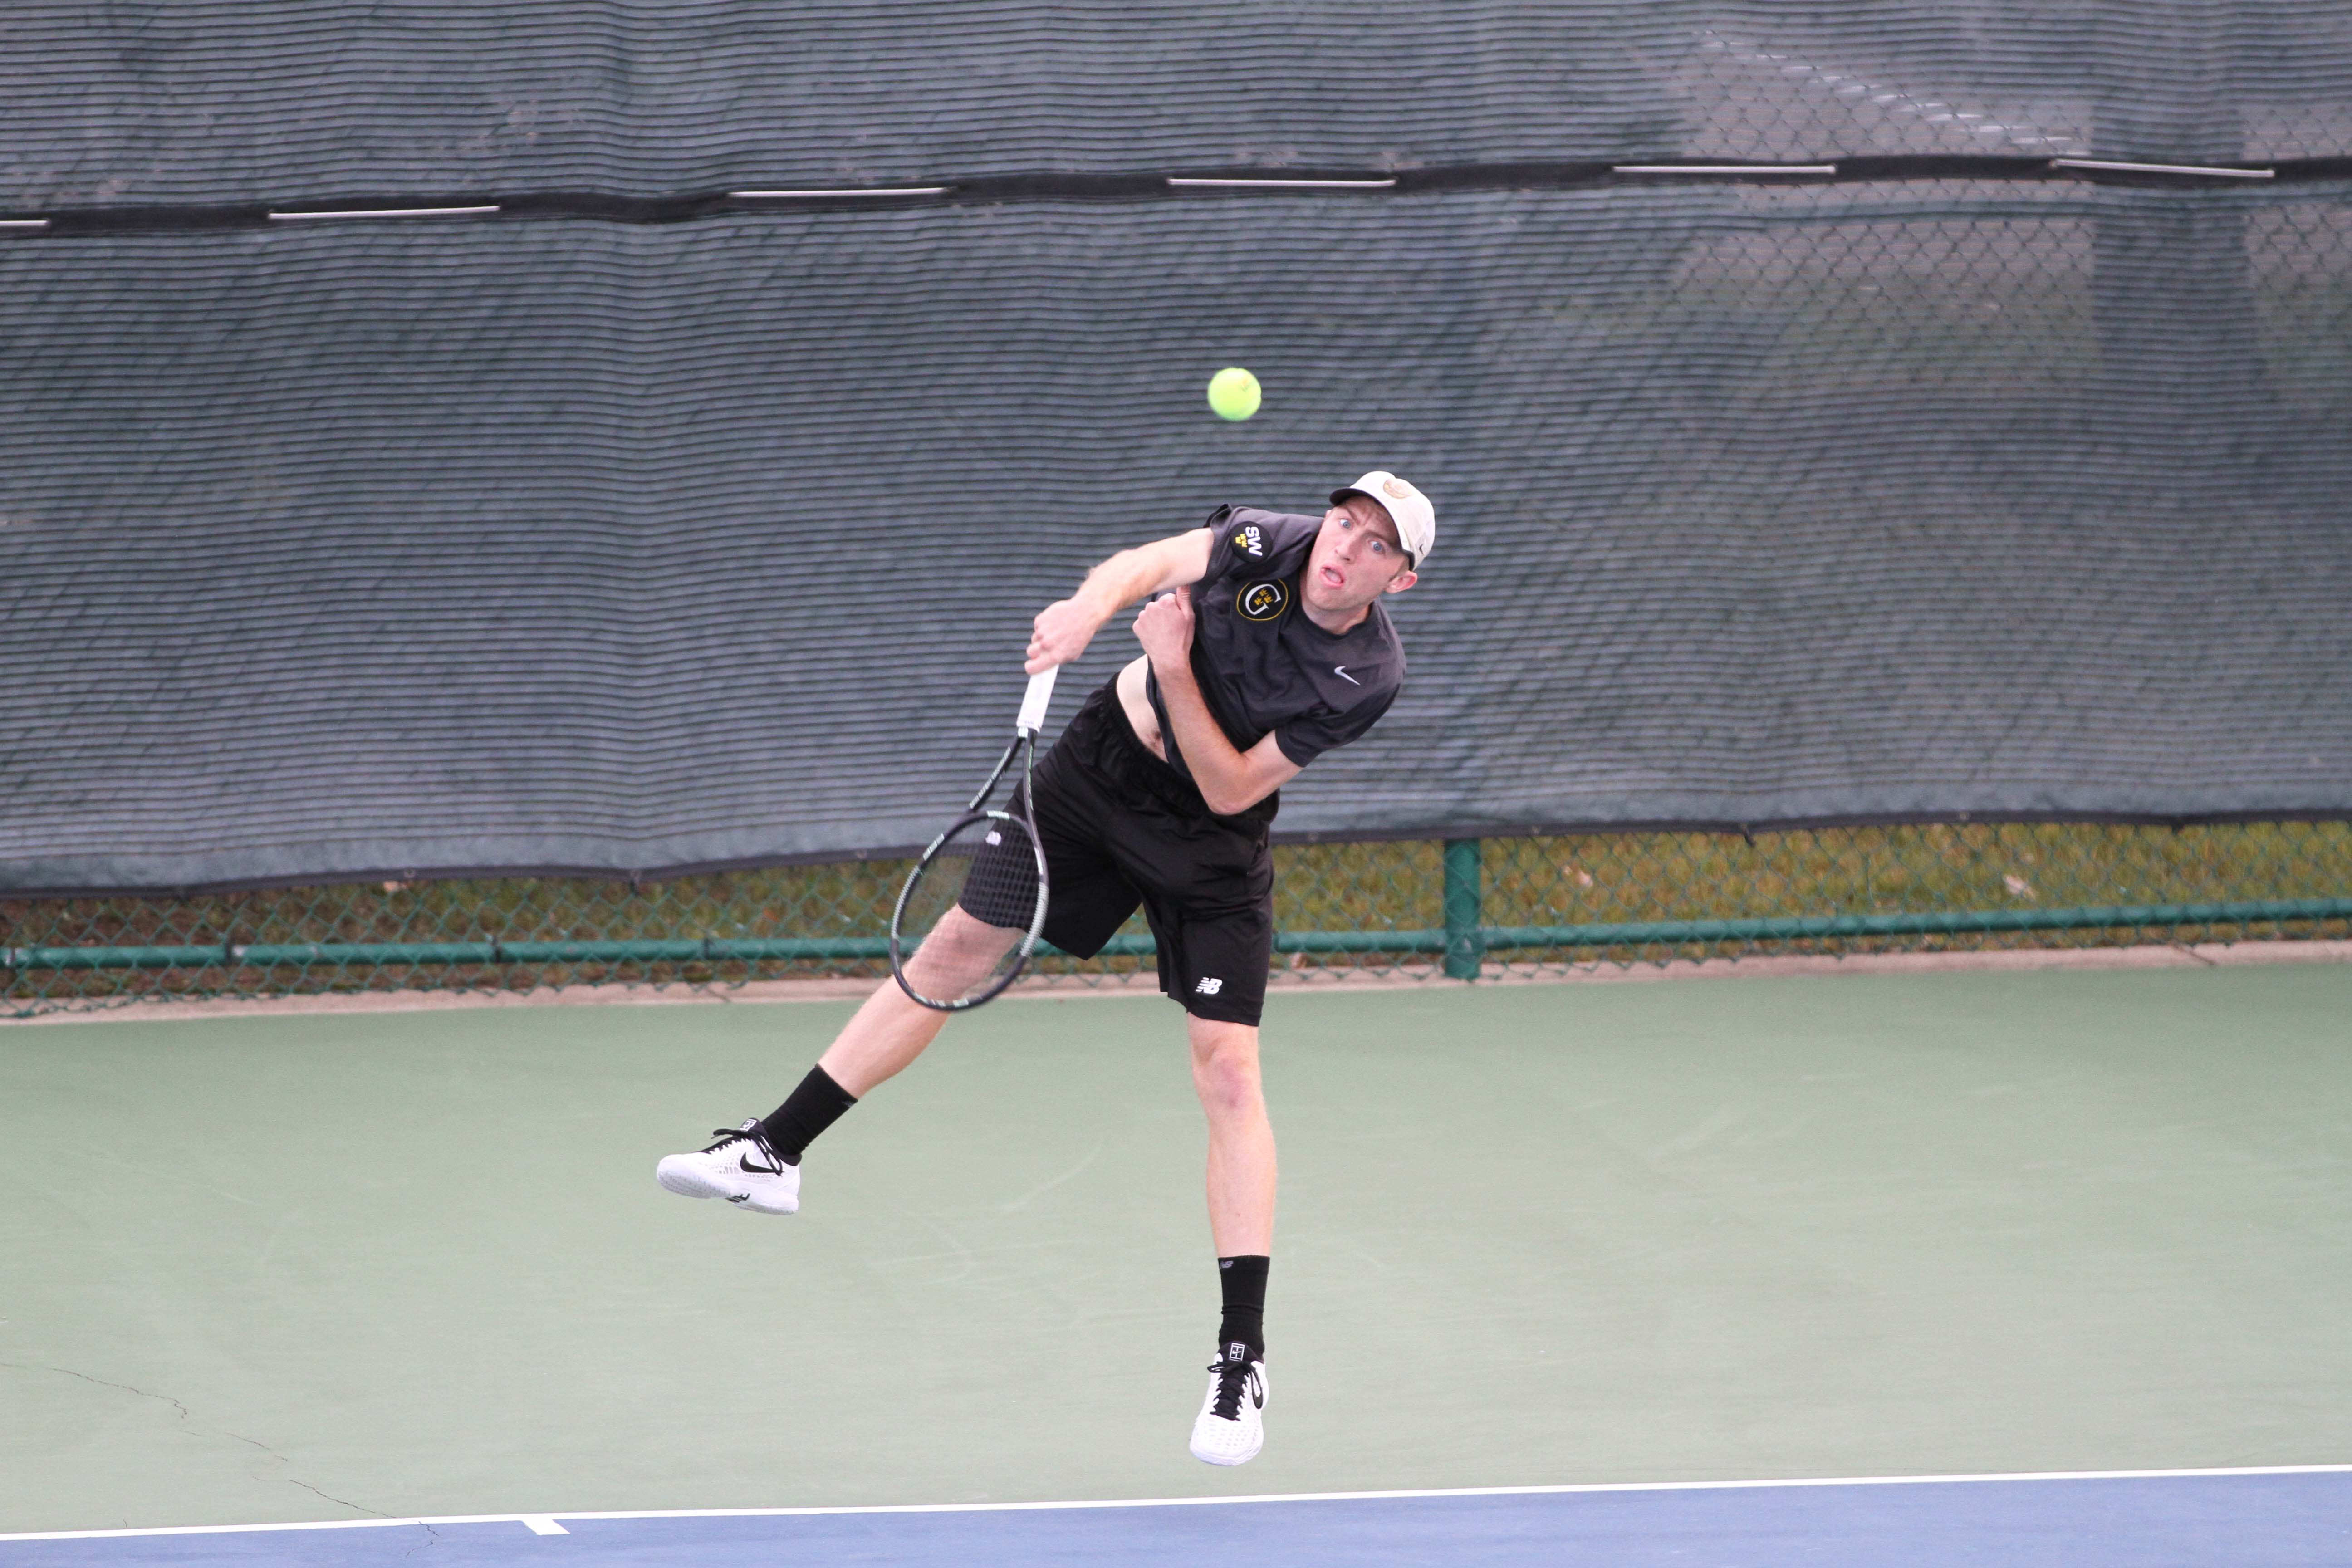 Senior Chase Johnson serves a ball during a match. The team got its second consecutive consolation title this past weekend at the ITA Indoor Championships.